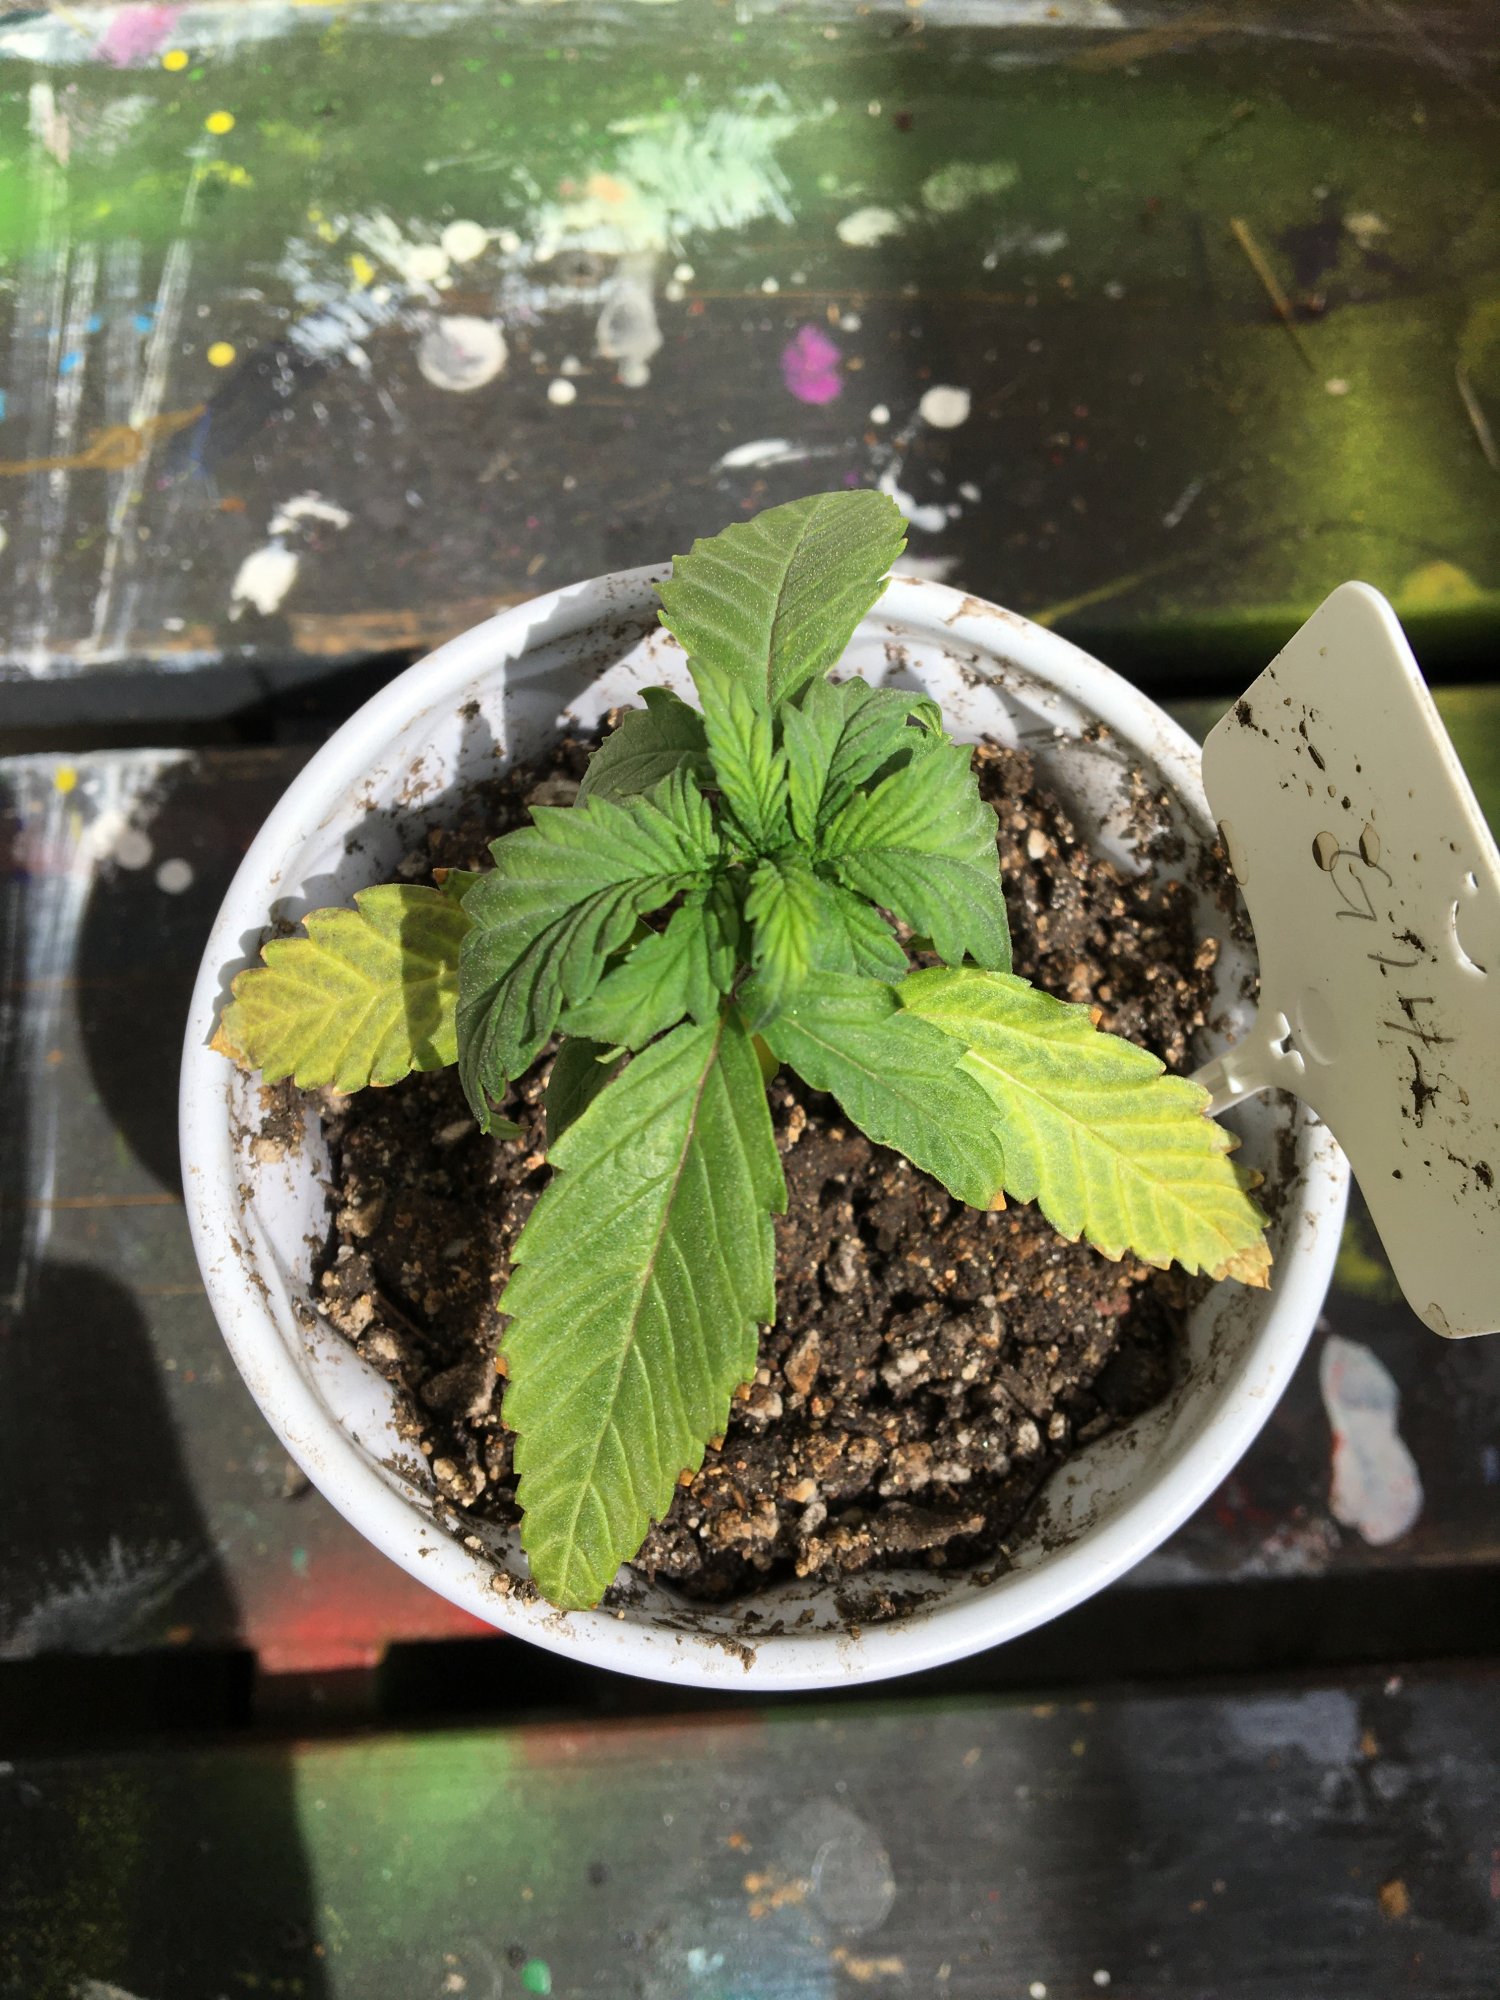 Leaf curling and yellowing issues on seedlings 6